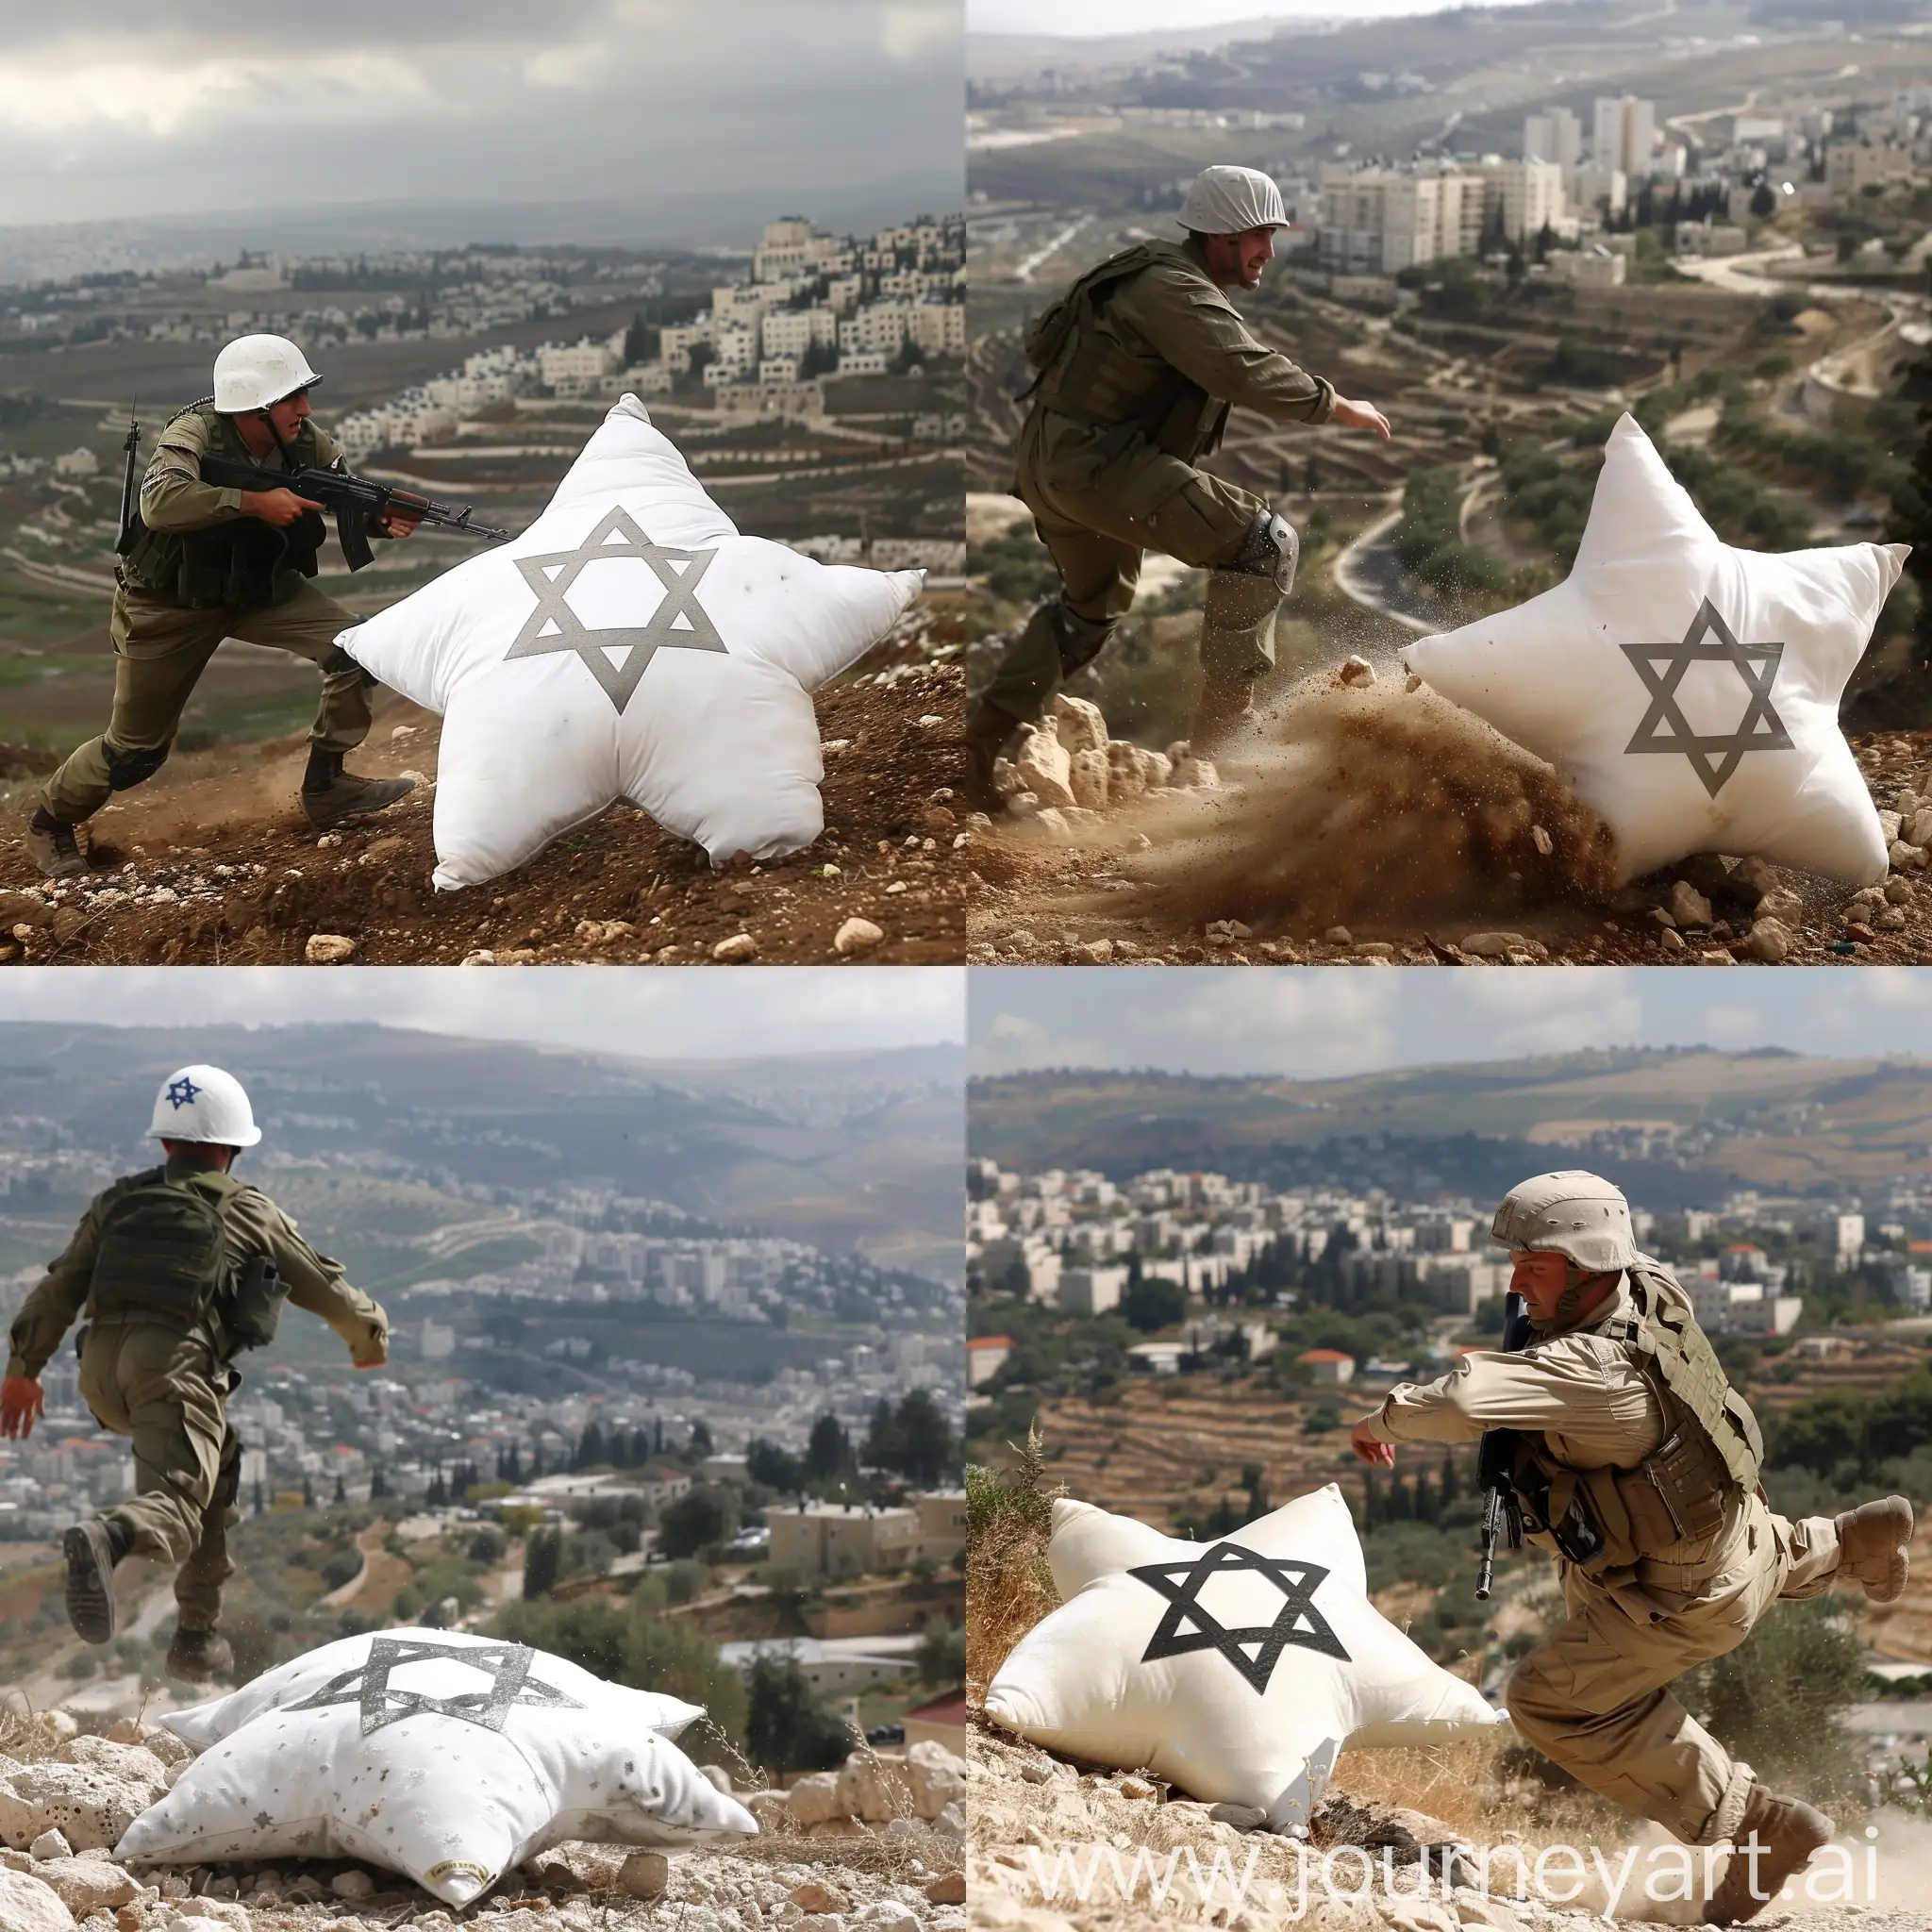 An Israeli soldier flees, stumbles and falls to the ground, and behind him is a city A pillow shaped like the star of Israel